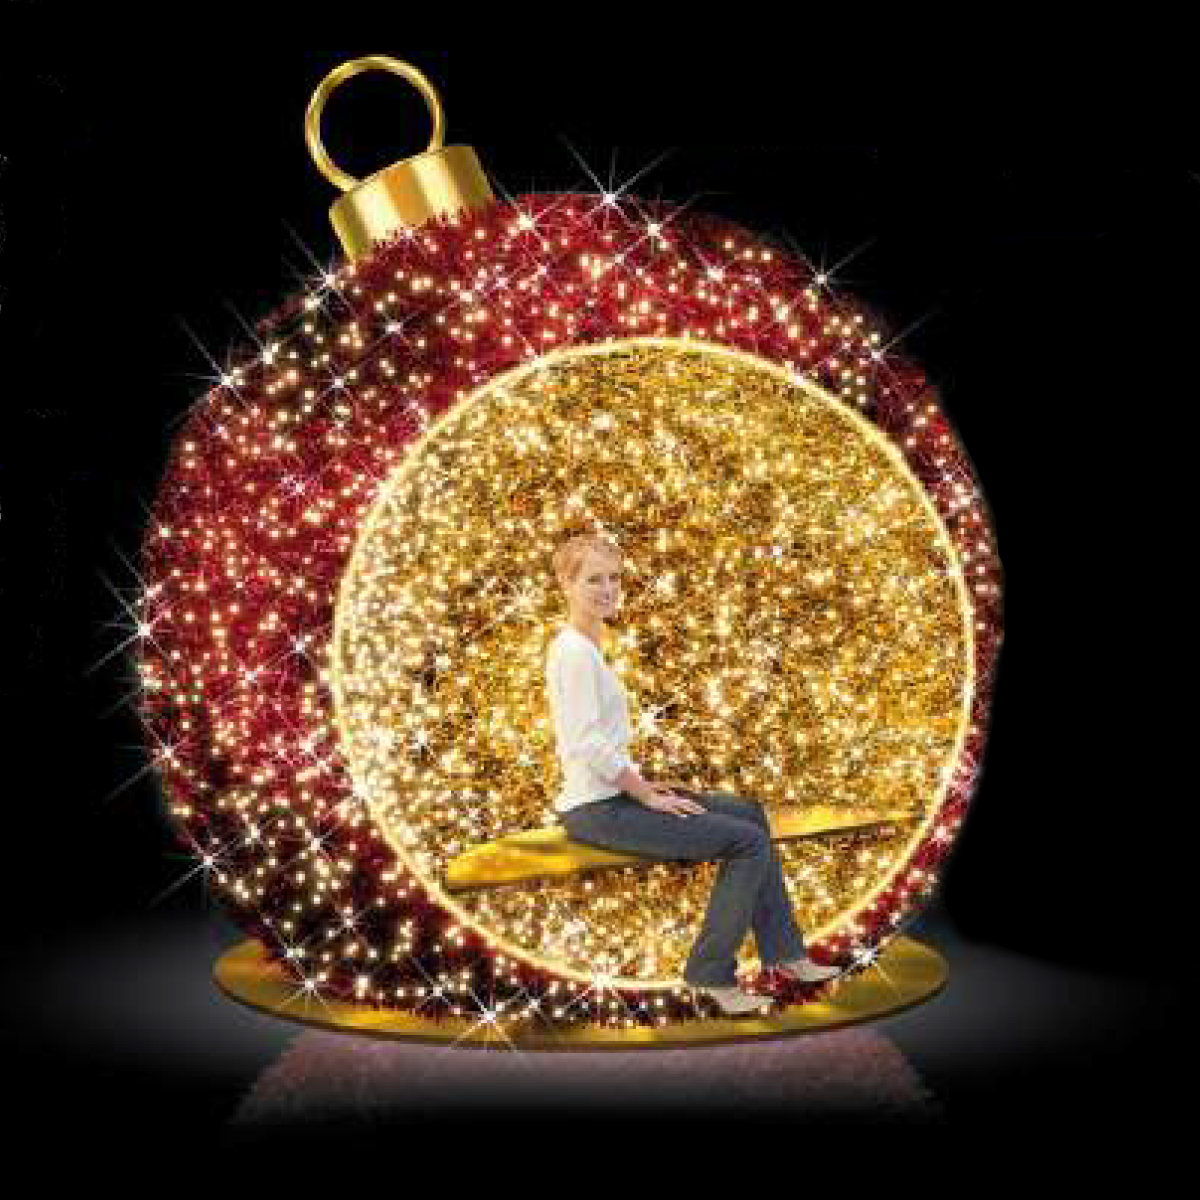 11 FT Red Sit in Ornament with Gold Seat